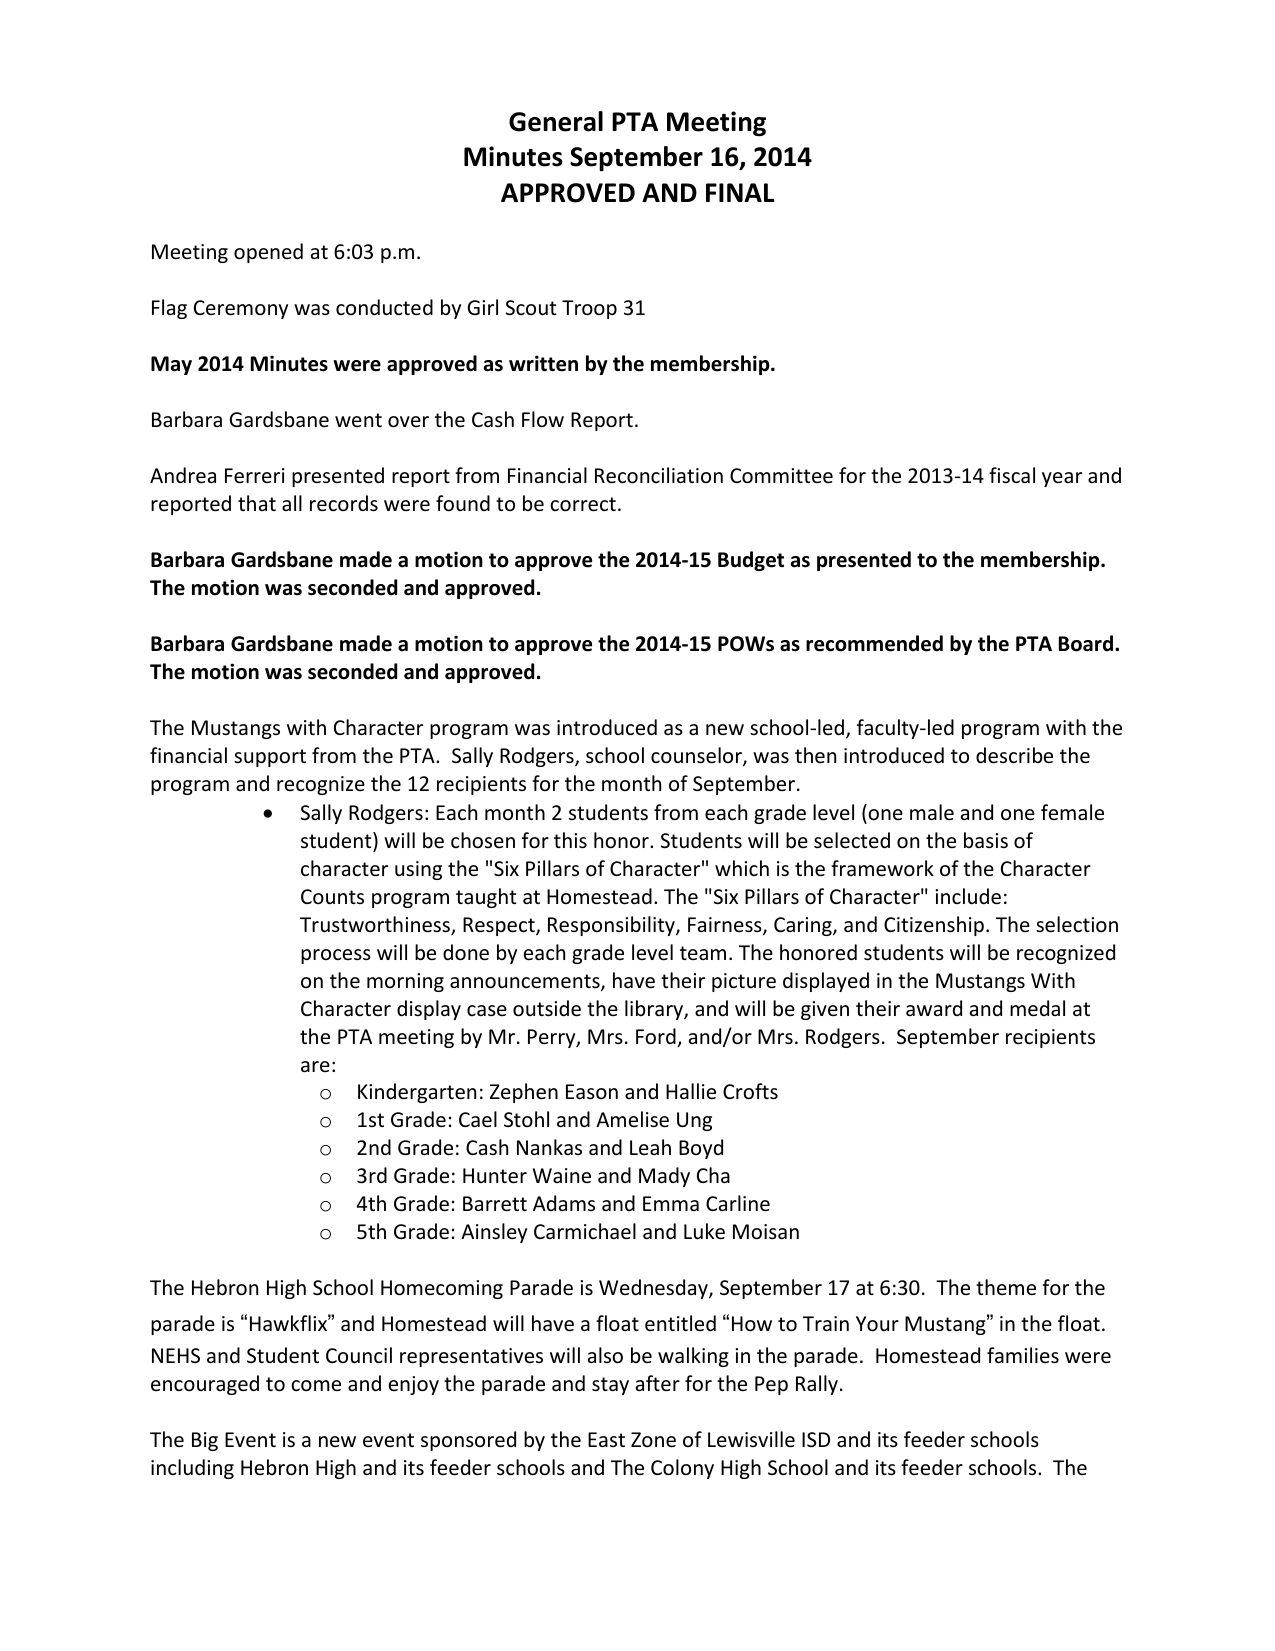 General PTA Meeting Minutes September 16 2014 APPROVED